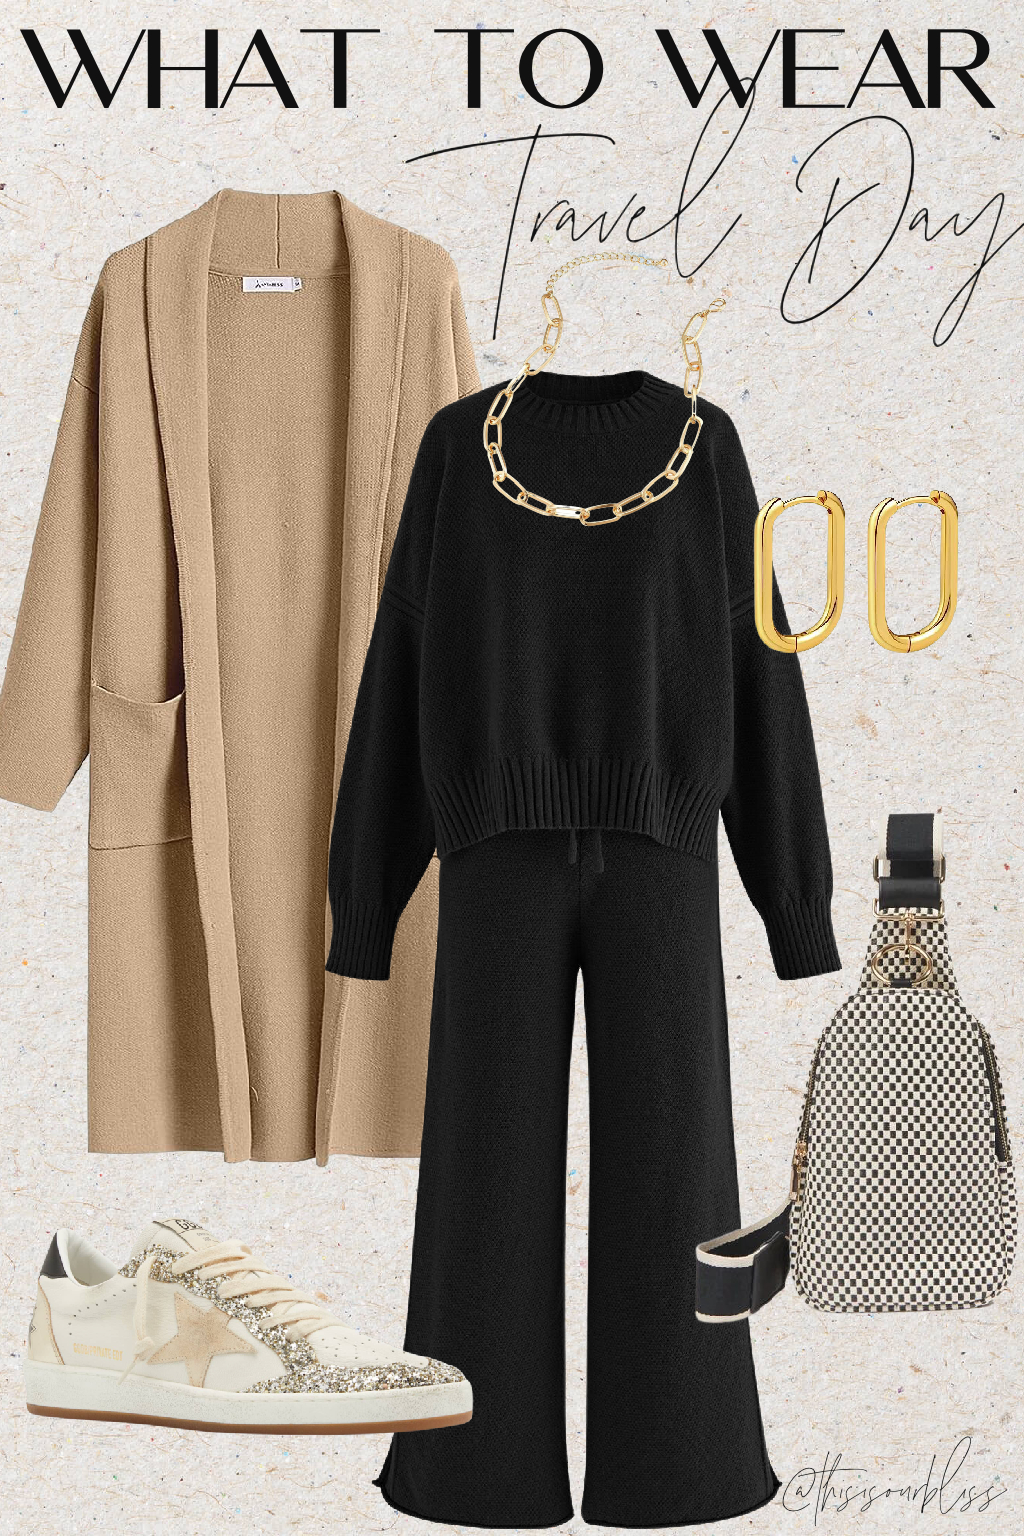 What to wear for travel day - travel outfit idea - Fall Style Guide - This is our Bliss